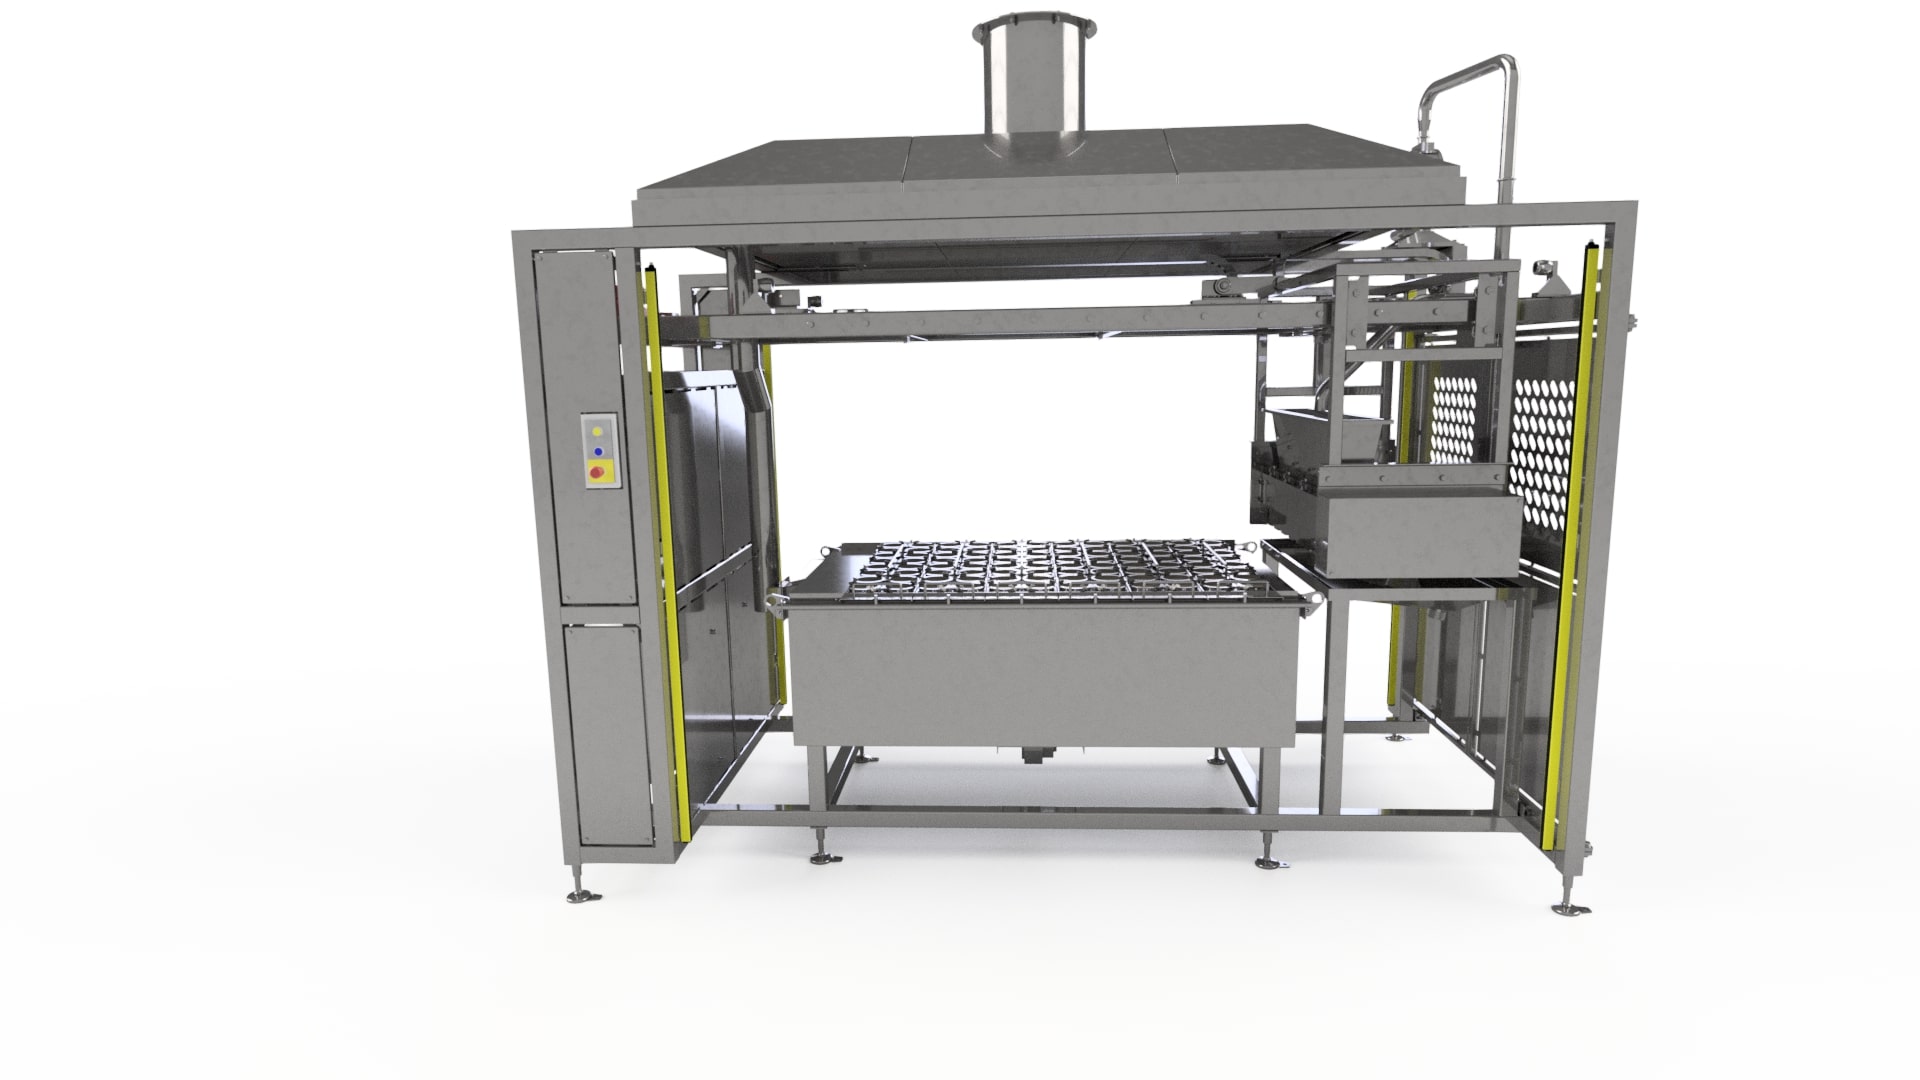 Sugden launch mini hotplate to support smaller bakeries